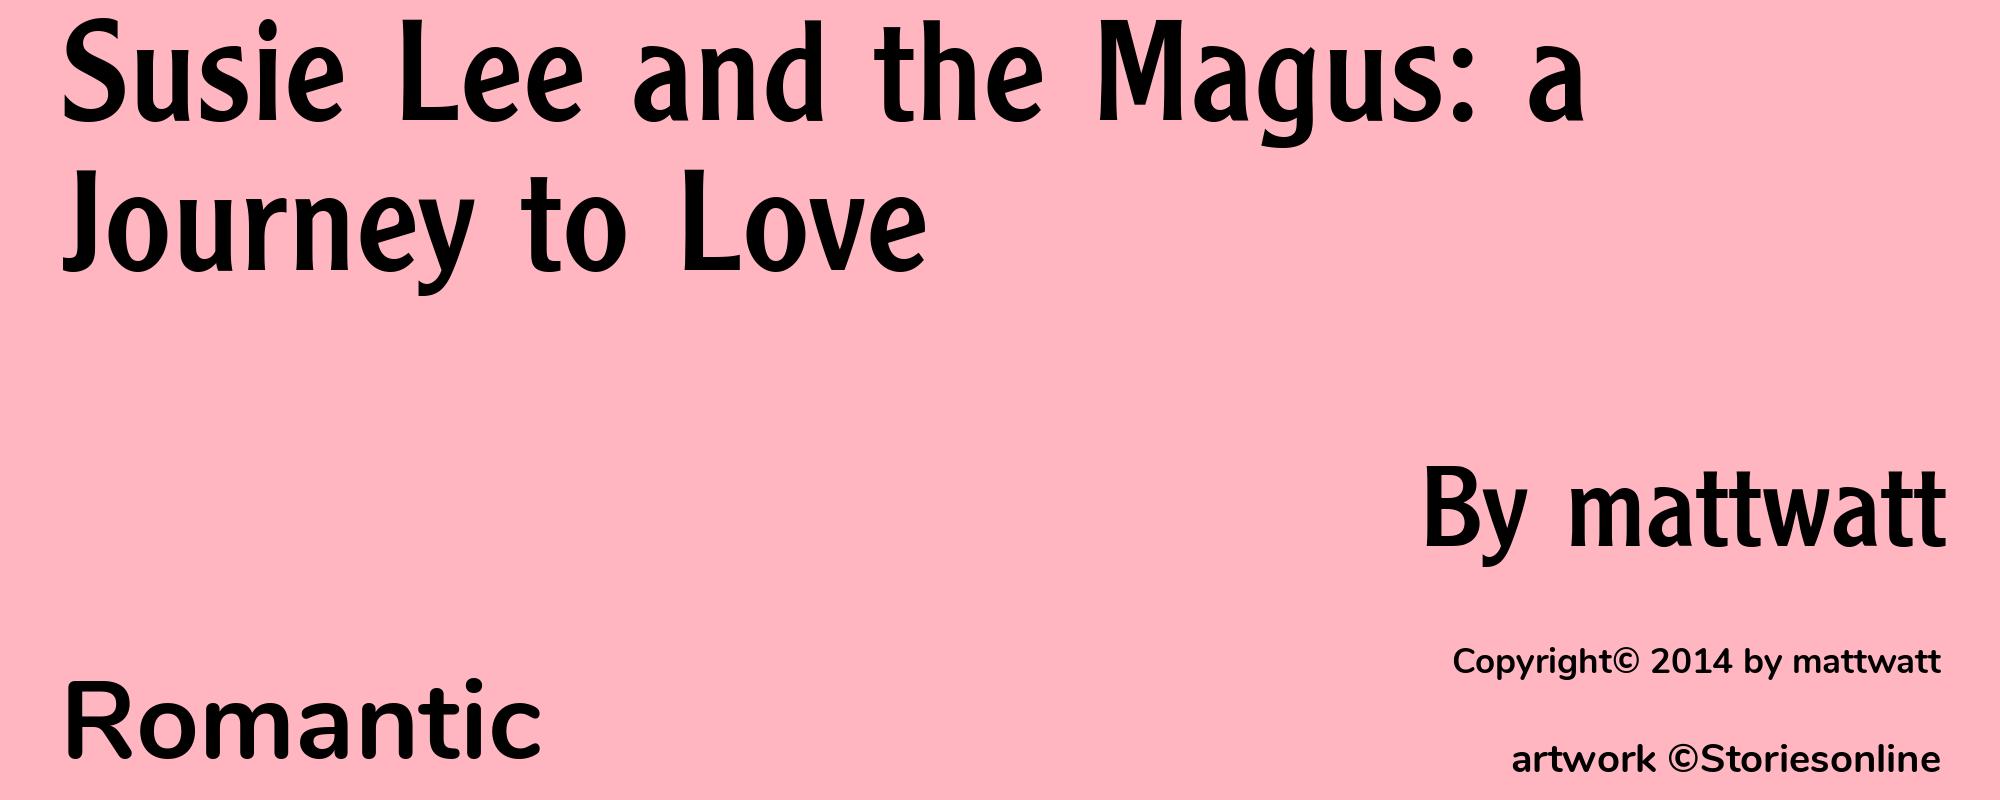 Susie Lee and the Magus: a Journey to Love - Cover